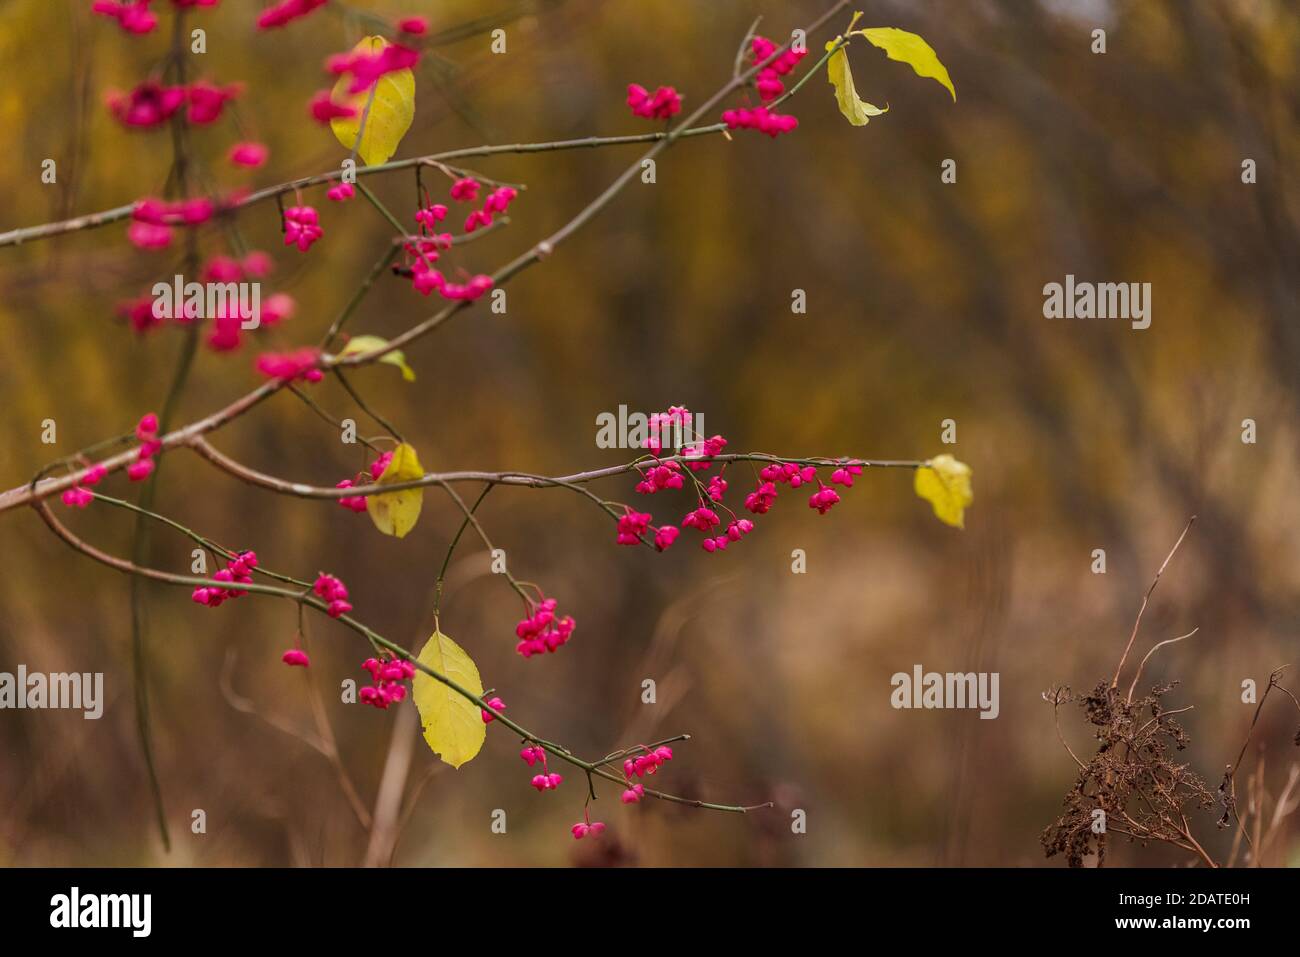 pink flowers bloomed on the branches of the trees during the autumn and another leaf remained on the branches before the winter cold Stock Photo